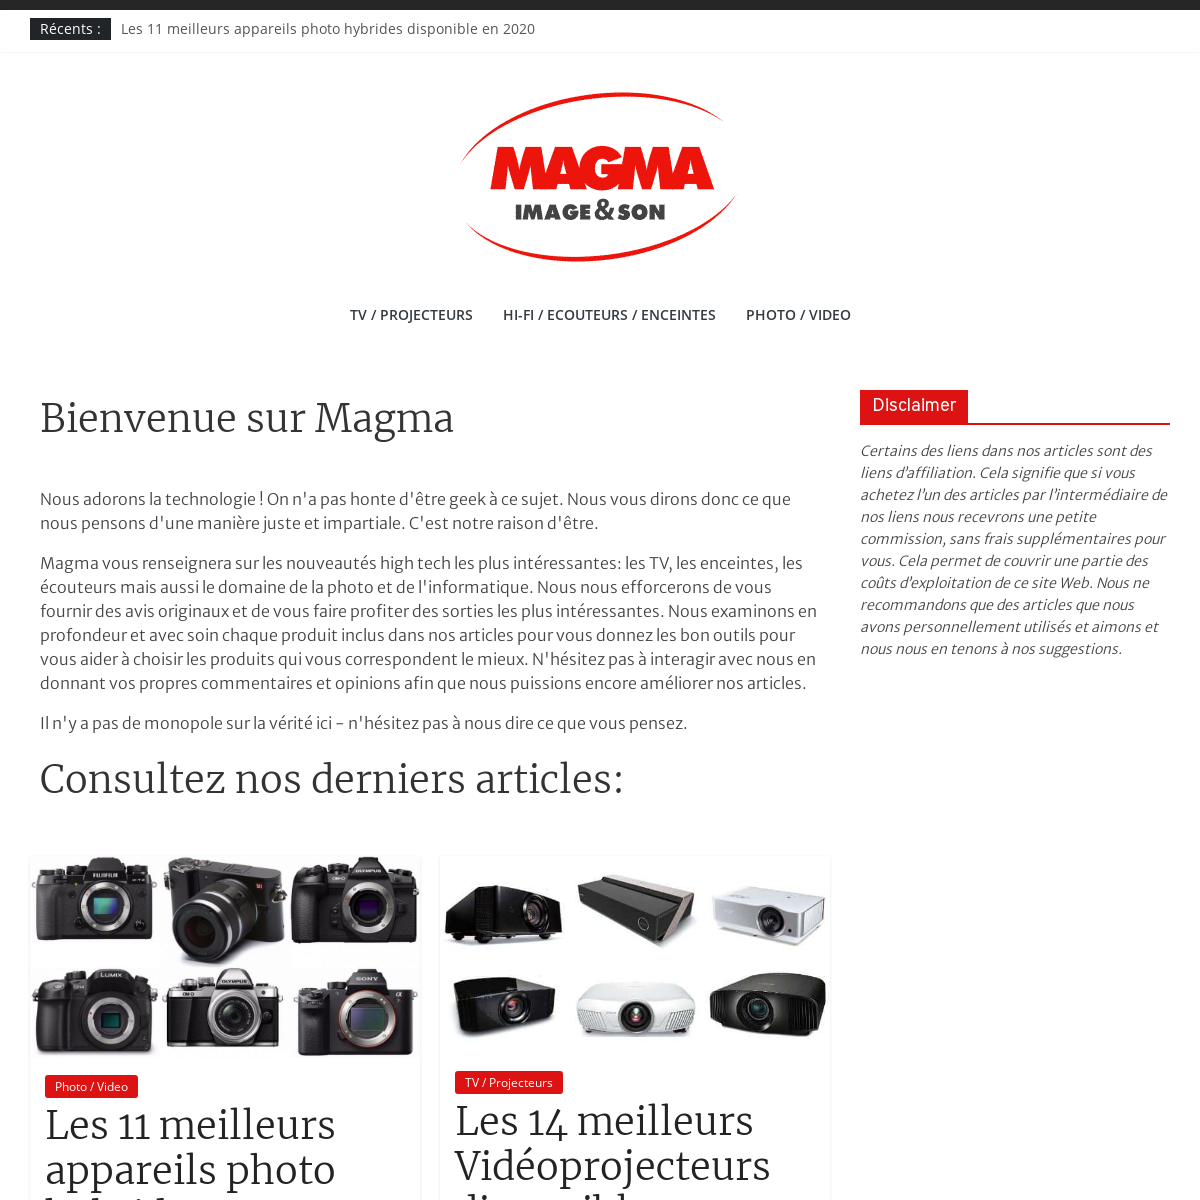 A complete backup of magma.fr